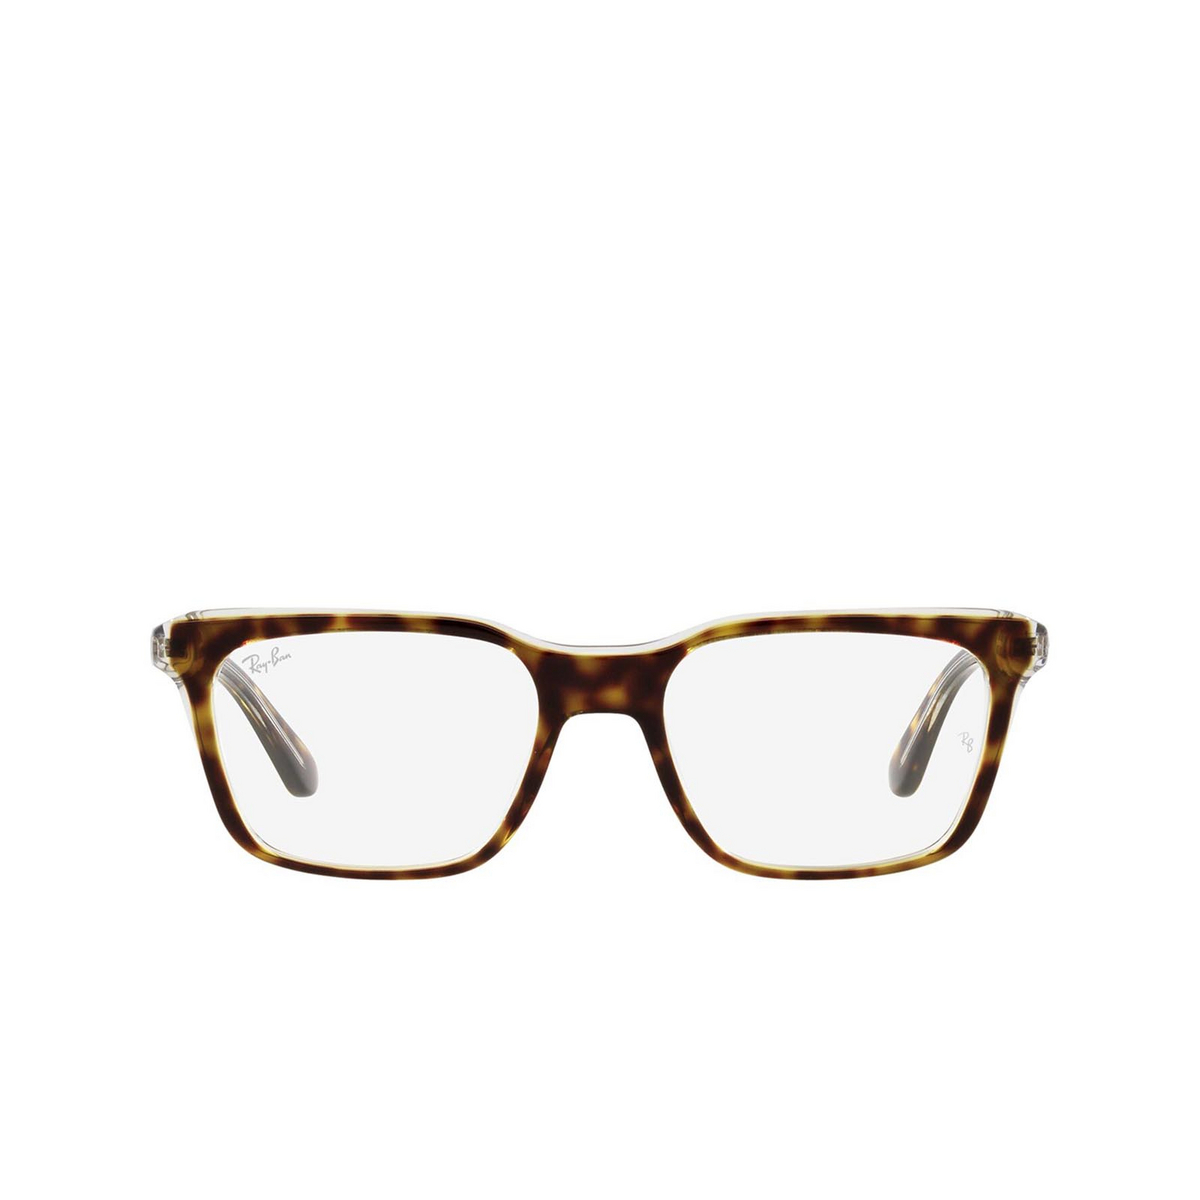 Ray-Ban RX5391 Eyeglasses 5082 Havana on Transparent - front view